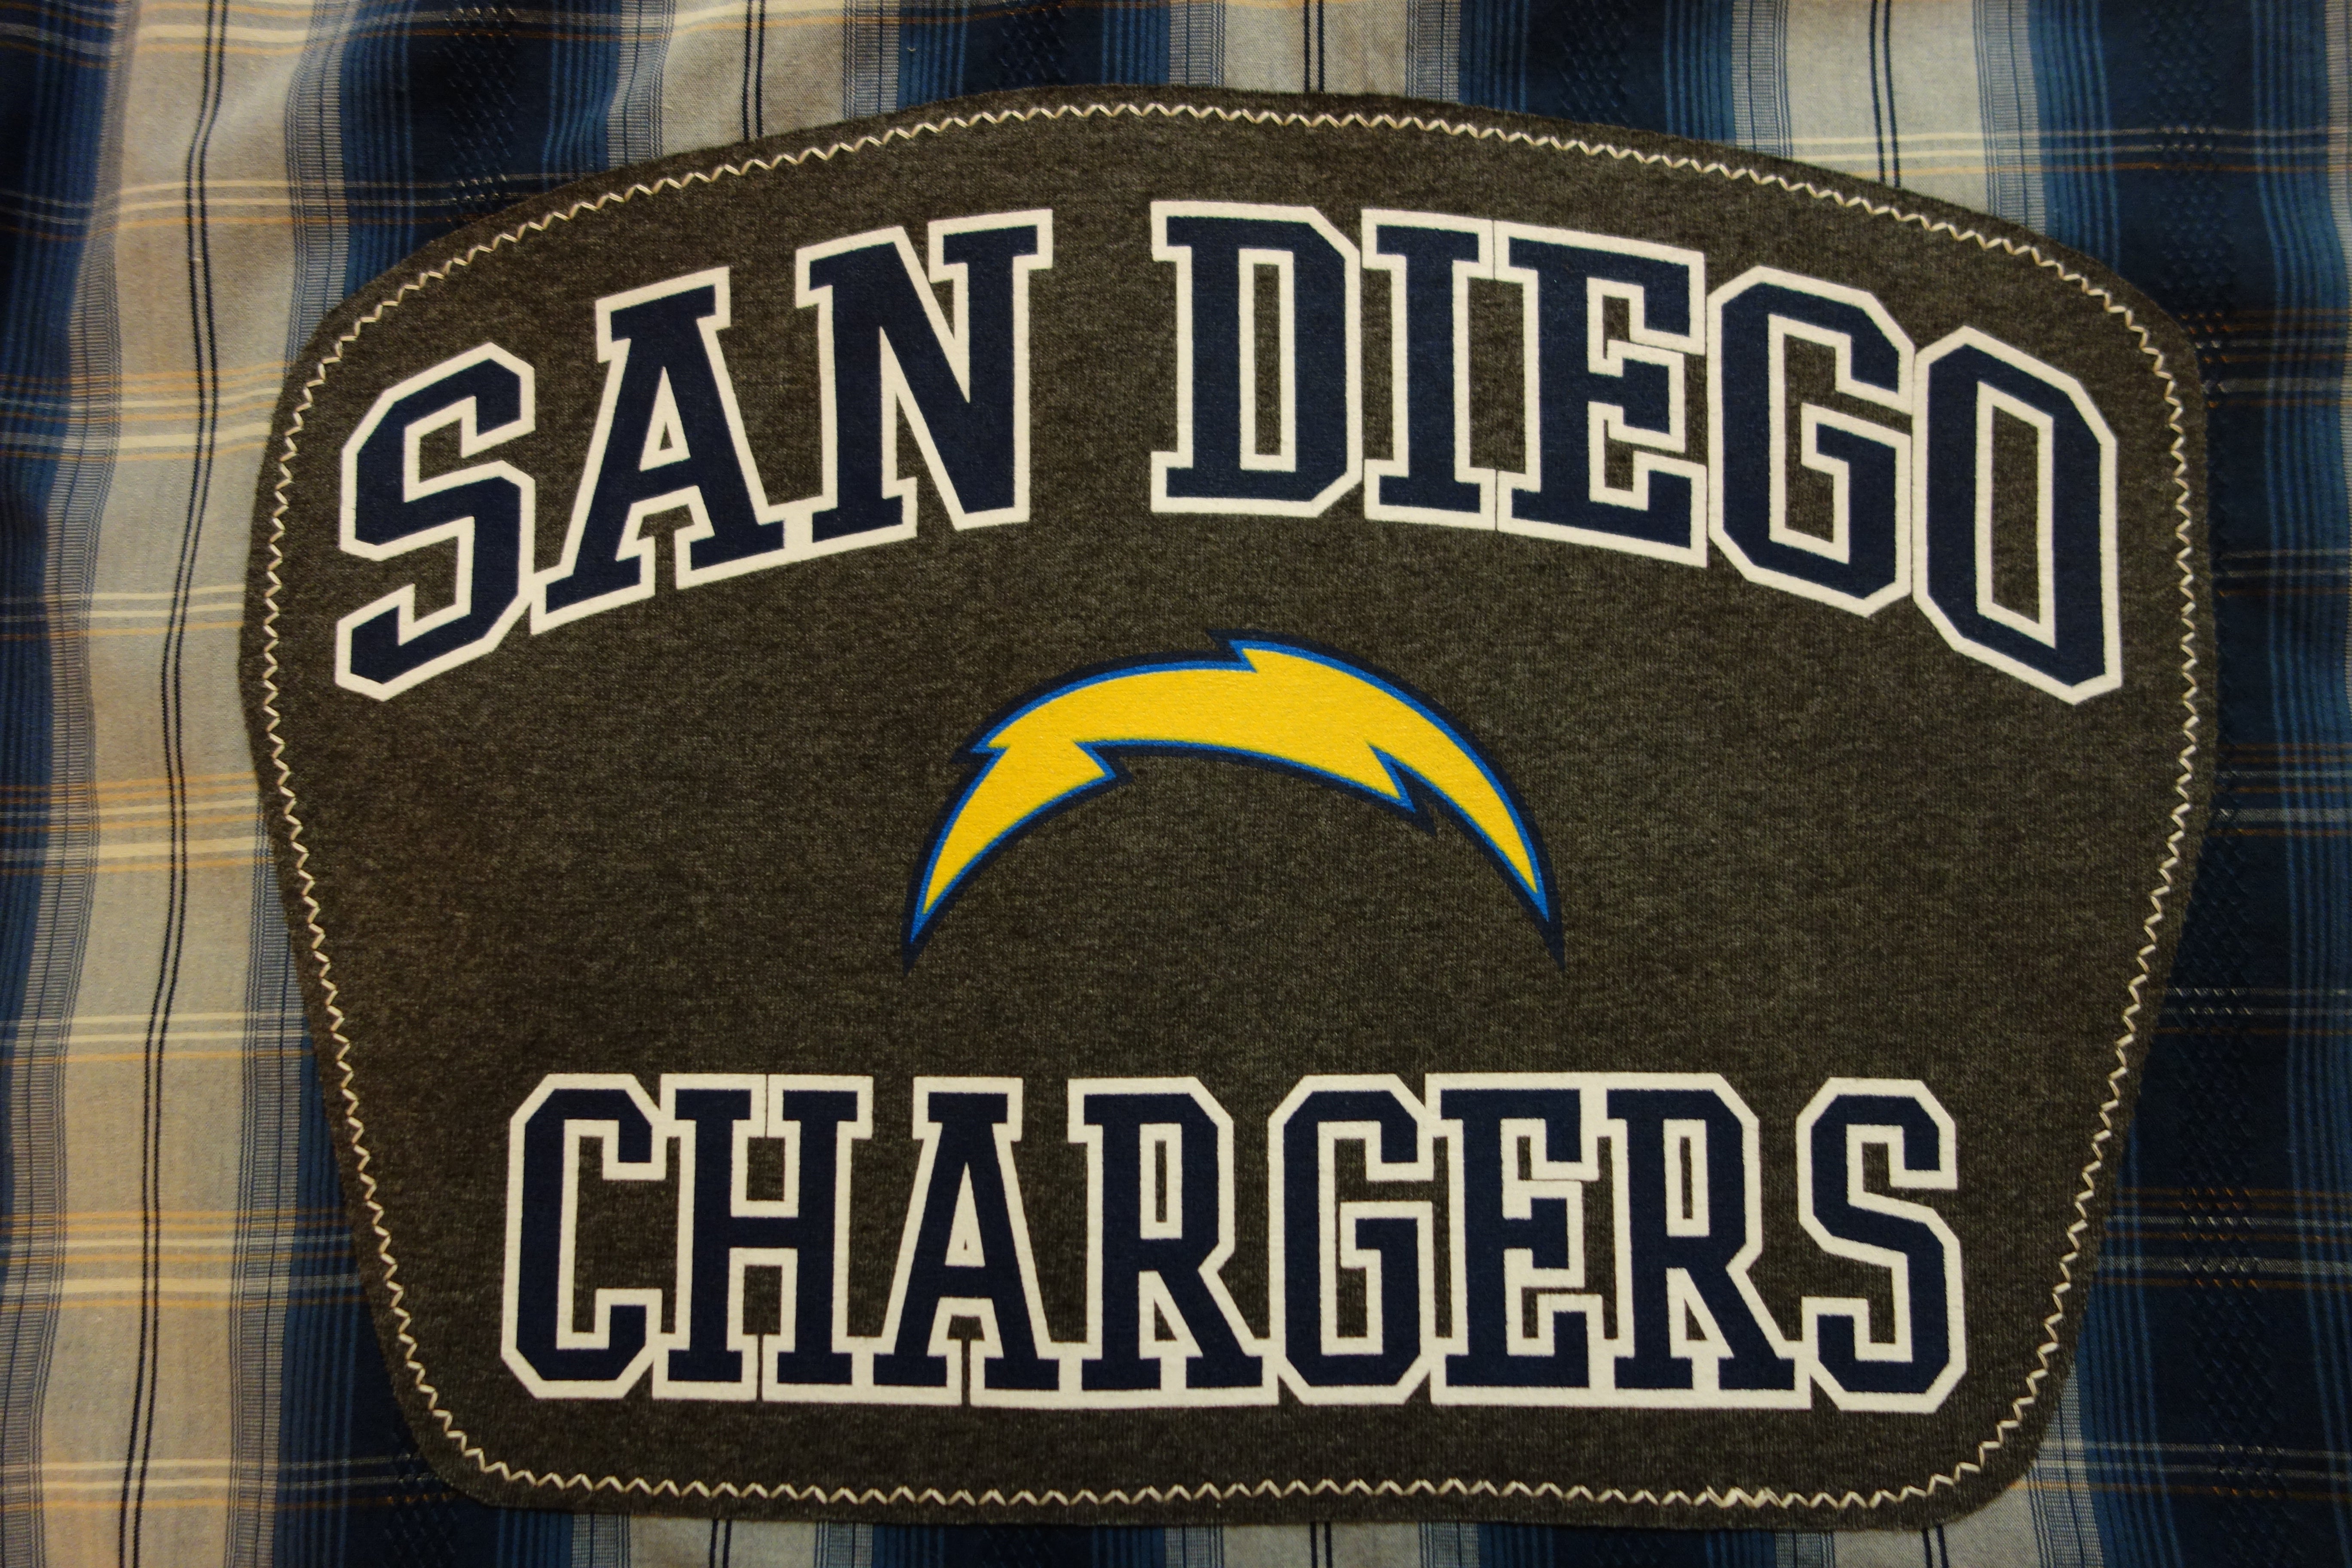 San Jose Chargers Levi's Strauss one of a kind shirt